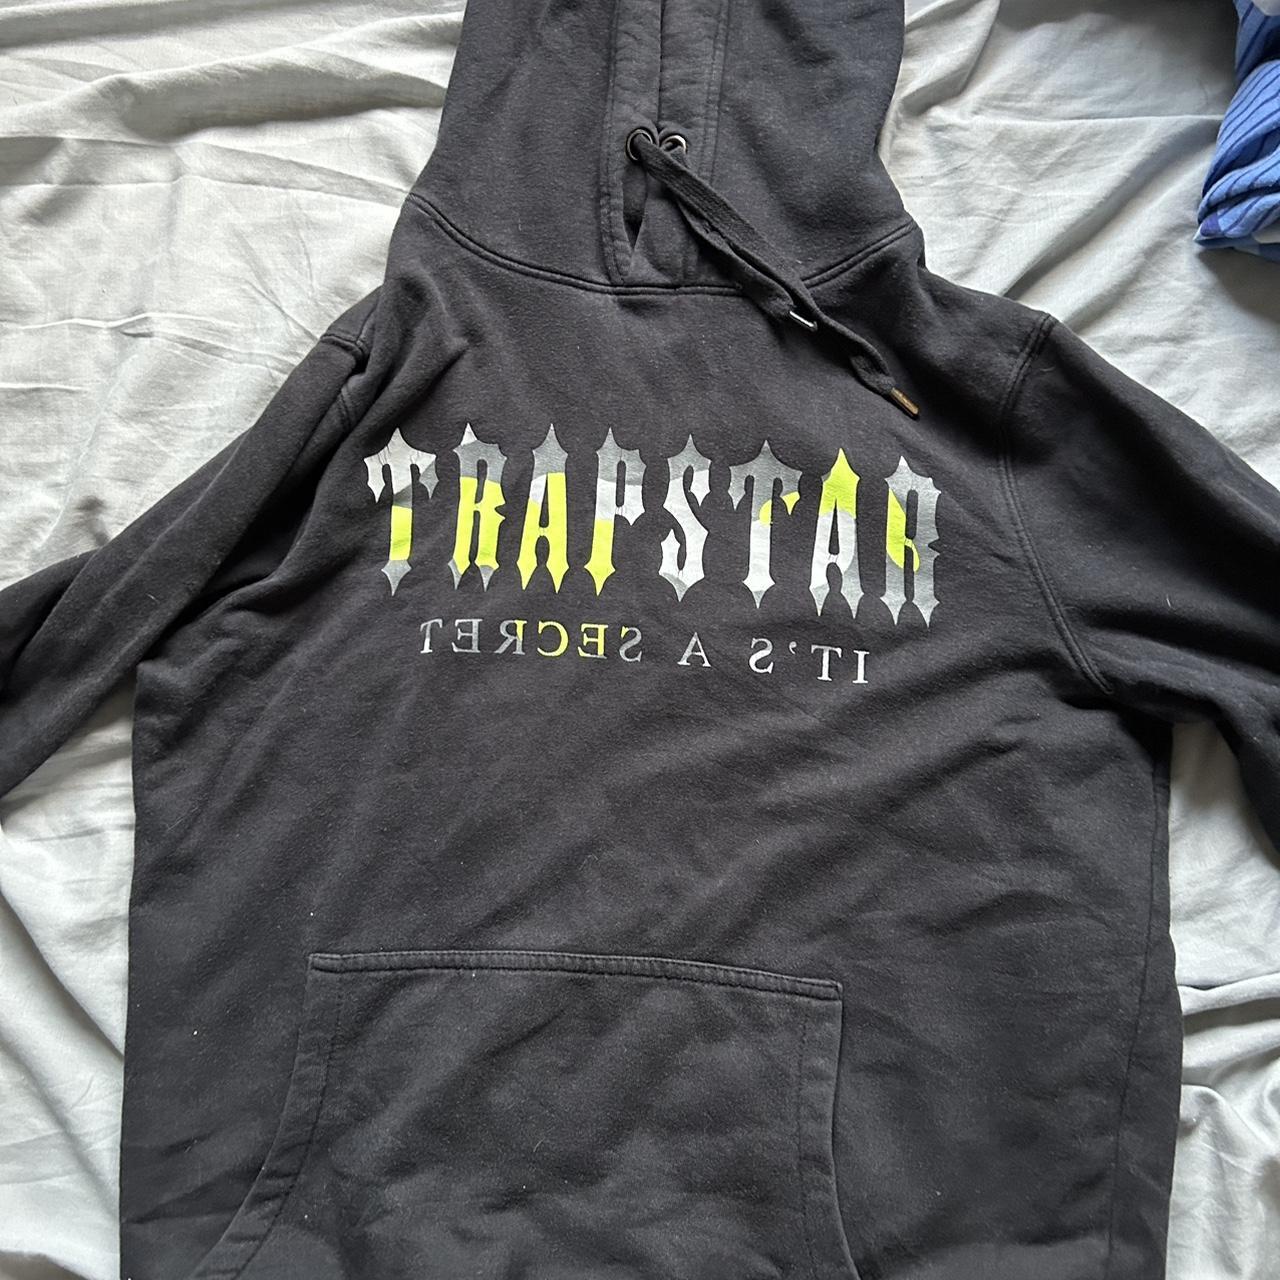 Trapstar jumper Size small Good condition - Depop